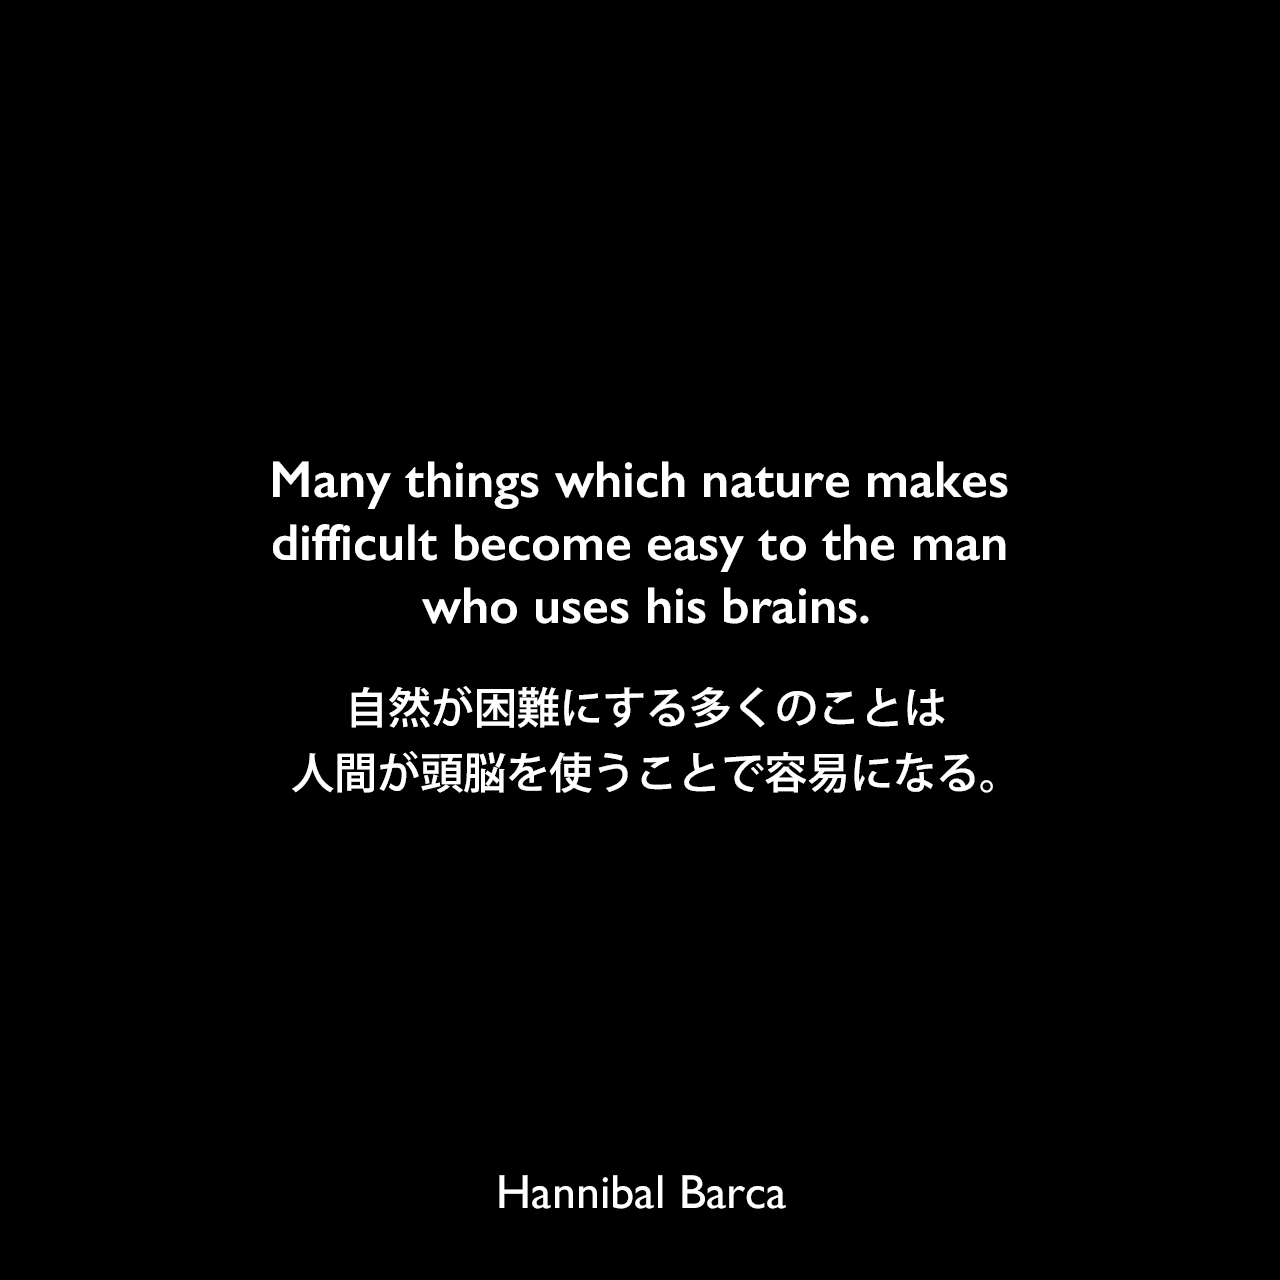 Many things which nature makes difficult become easy to the man who uses his brains.自然が困難にする多くのことは、人間が頭脳を使うことで容易になる。Hannibal Barca